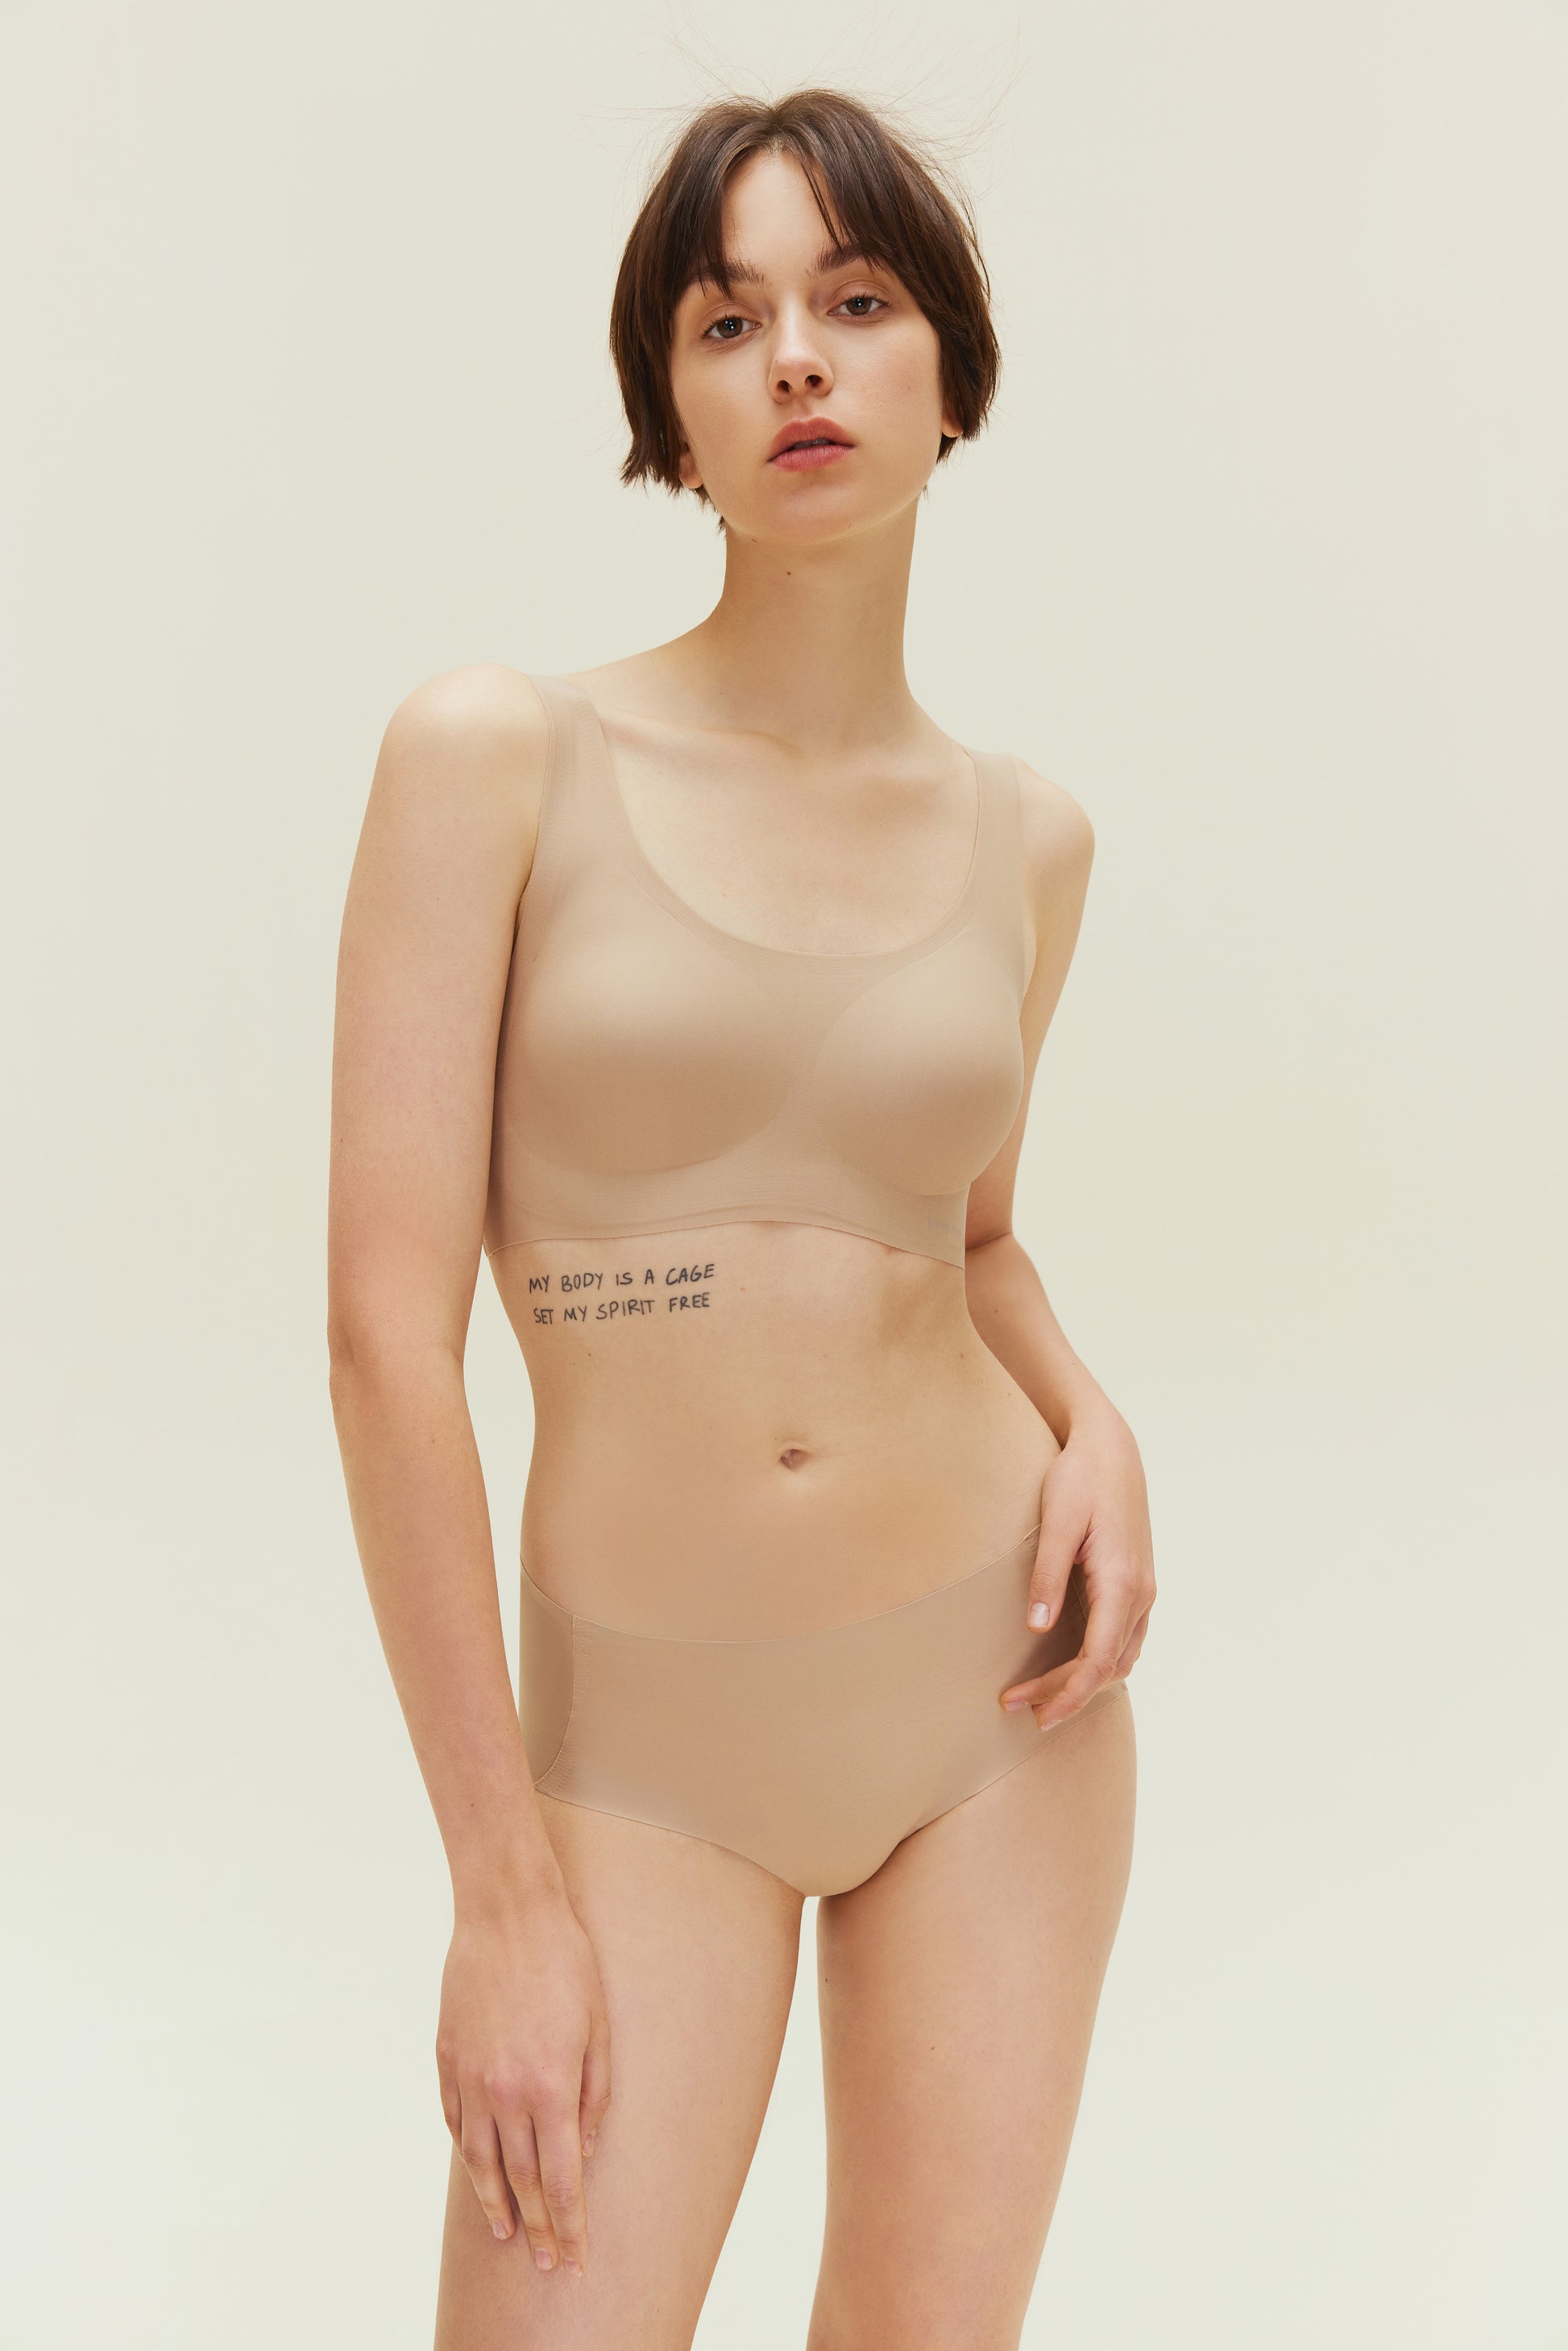 woman wearing nude color bra and brief